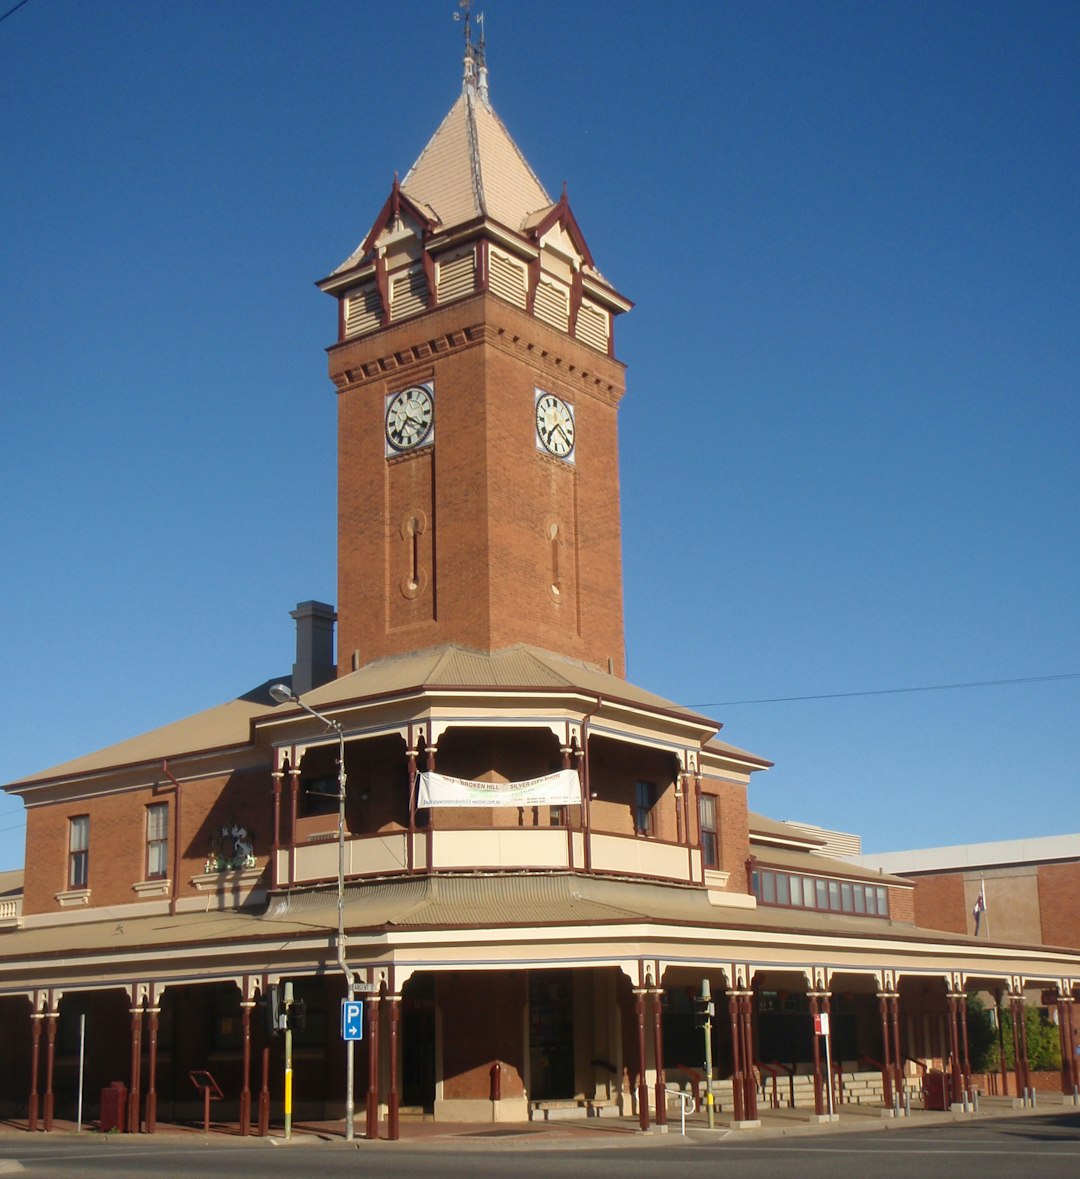 Travel Tips and Stories of Broken Hill in Australia